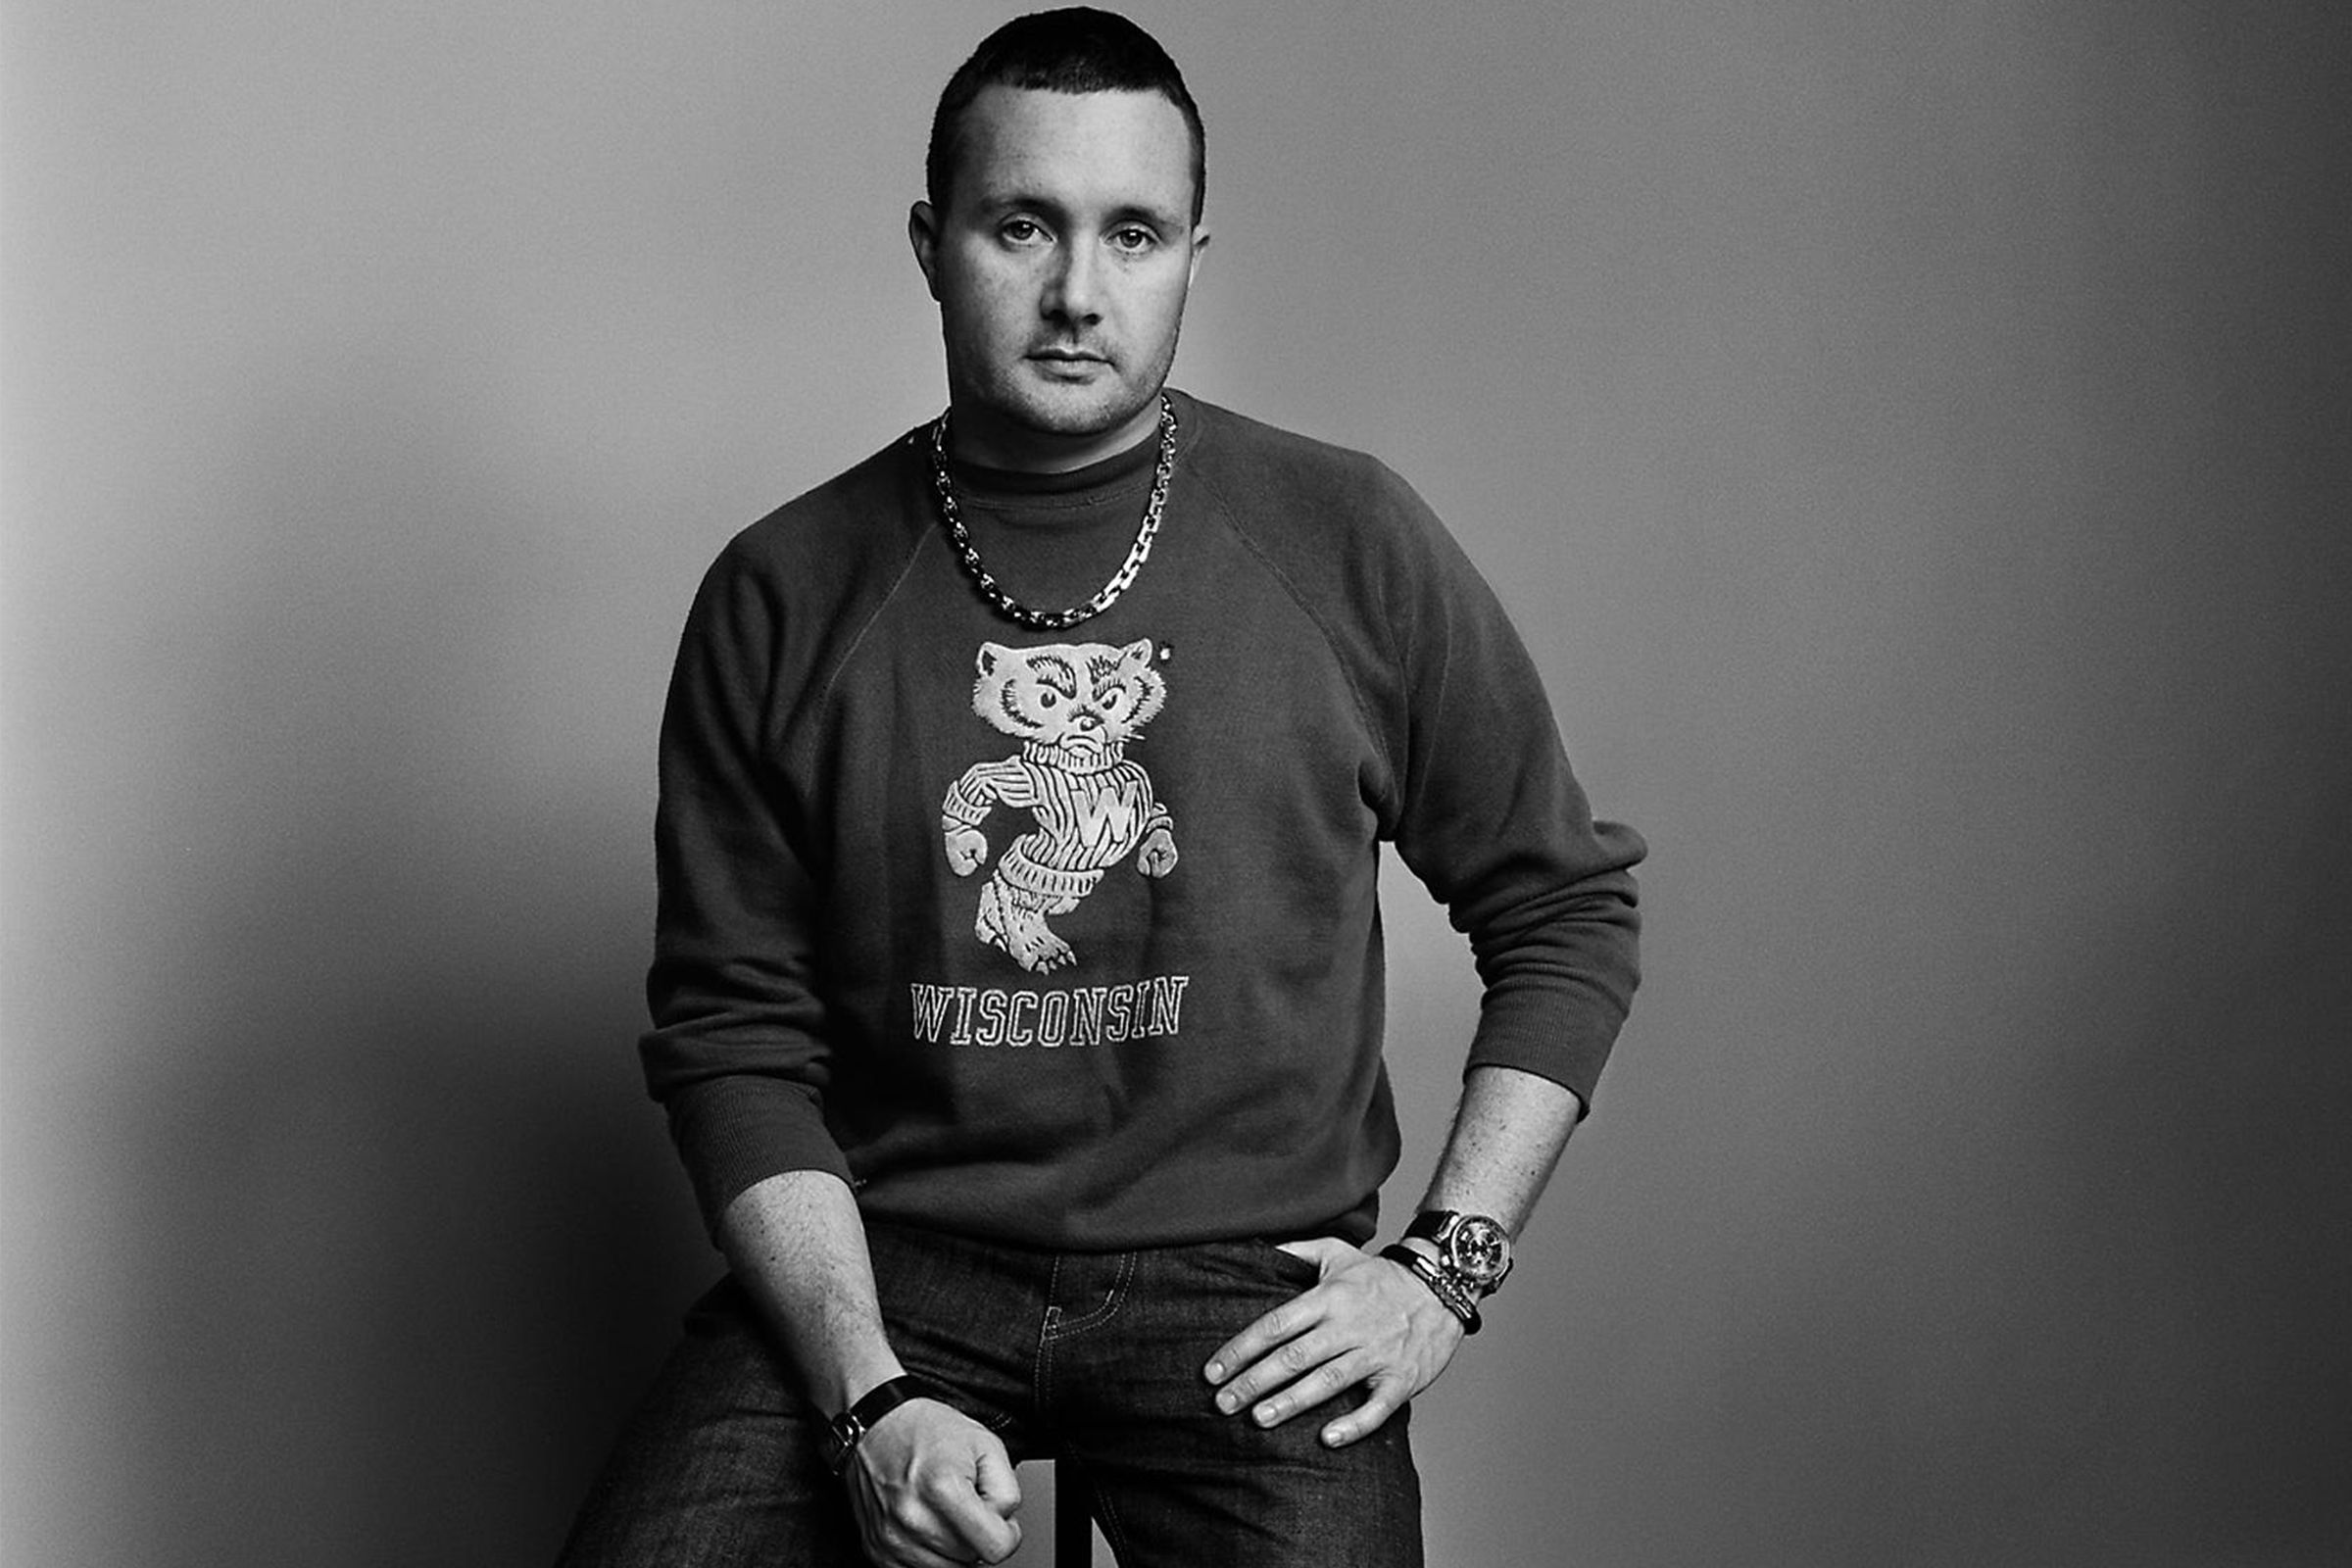 Kim Jones, Streetwear & How This Relationship Led up to the Supreme & Louis  Vuitton Collaboration 